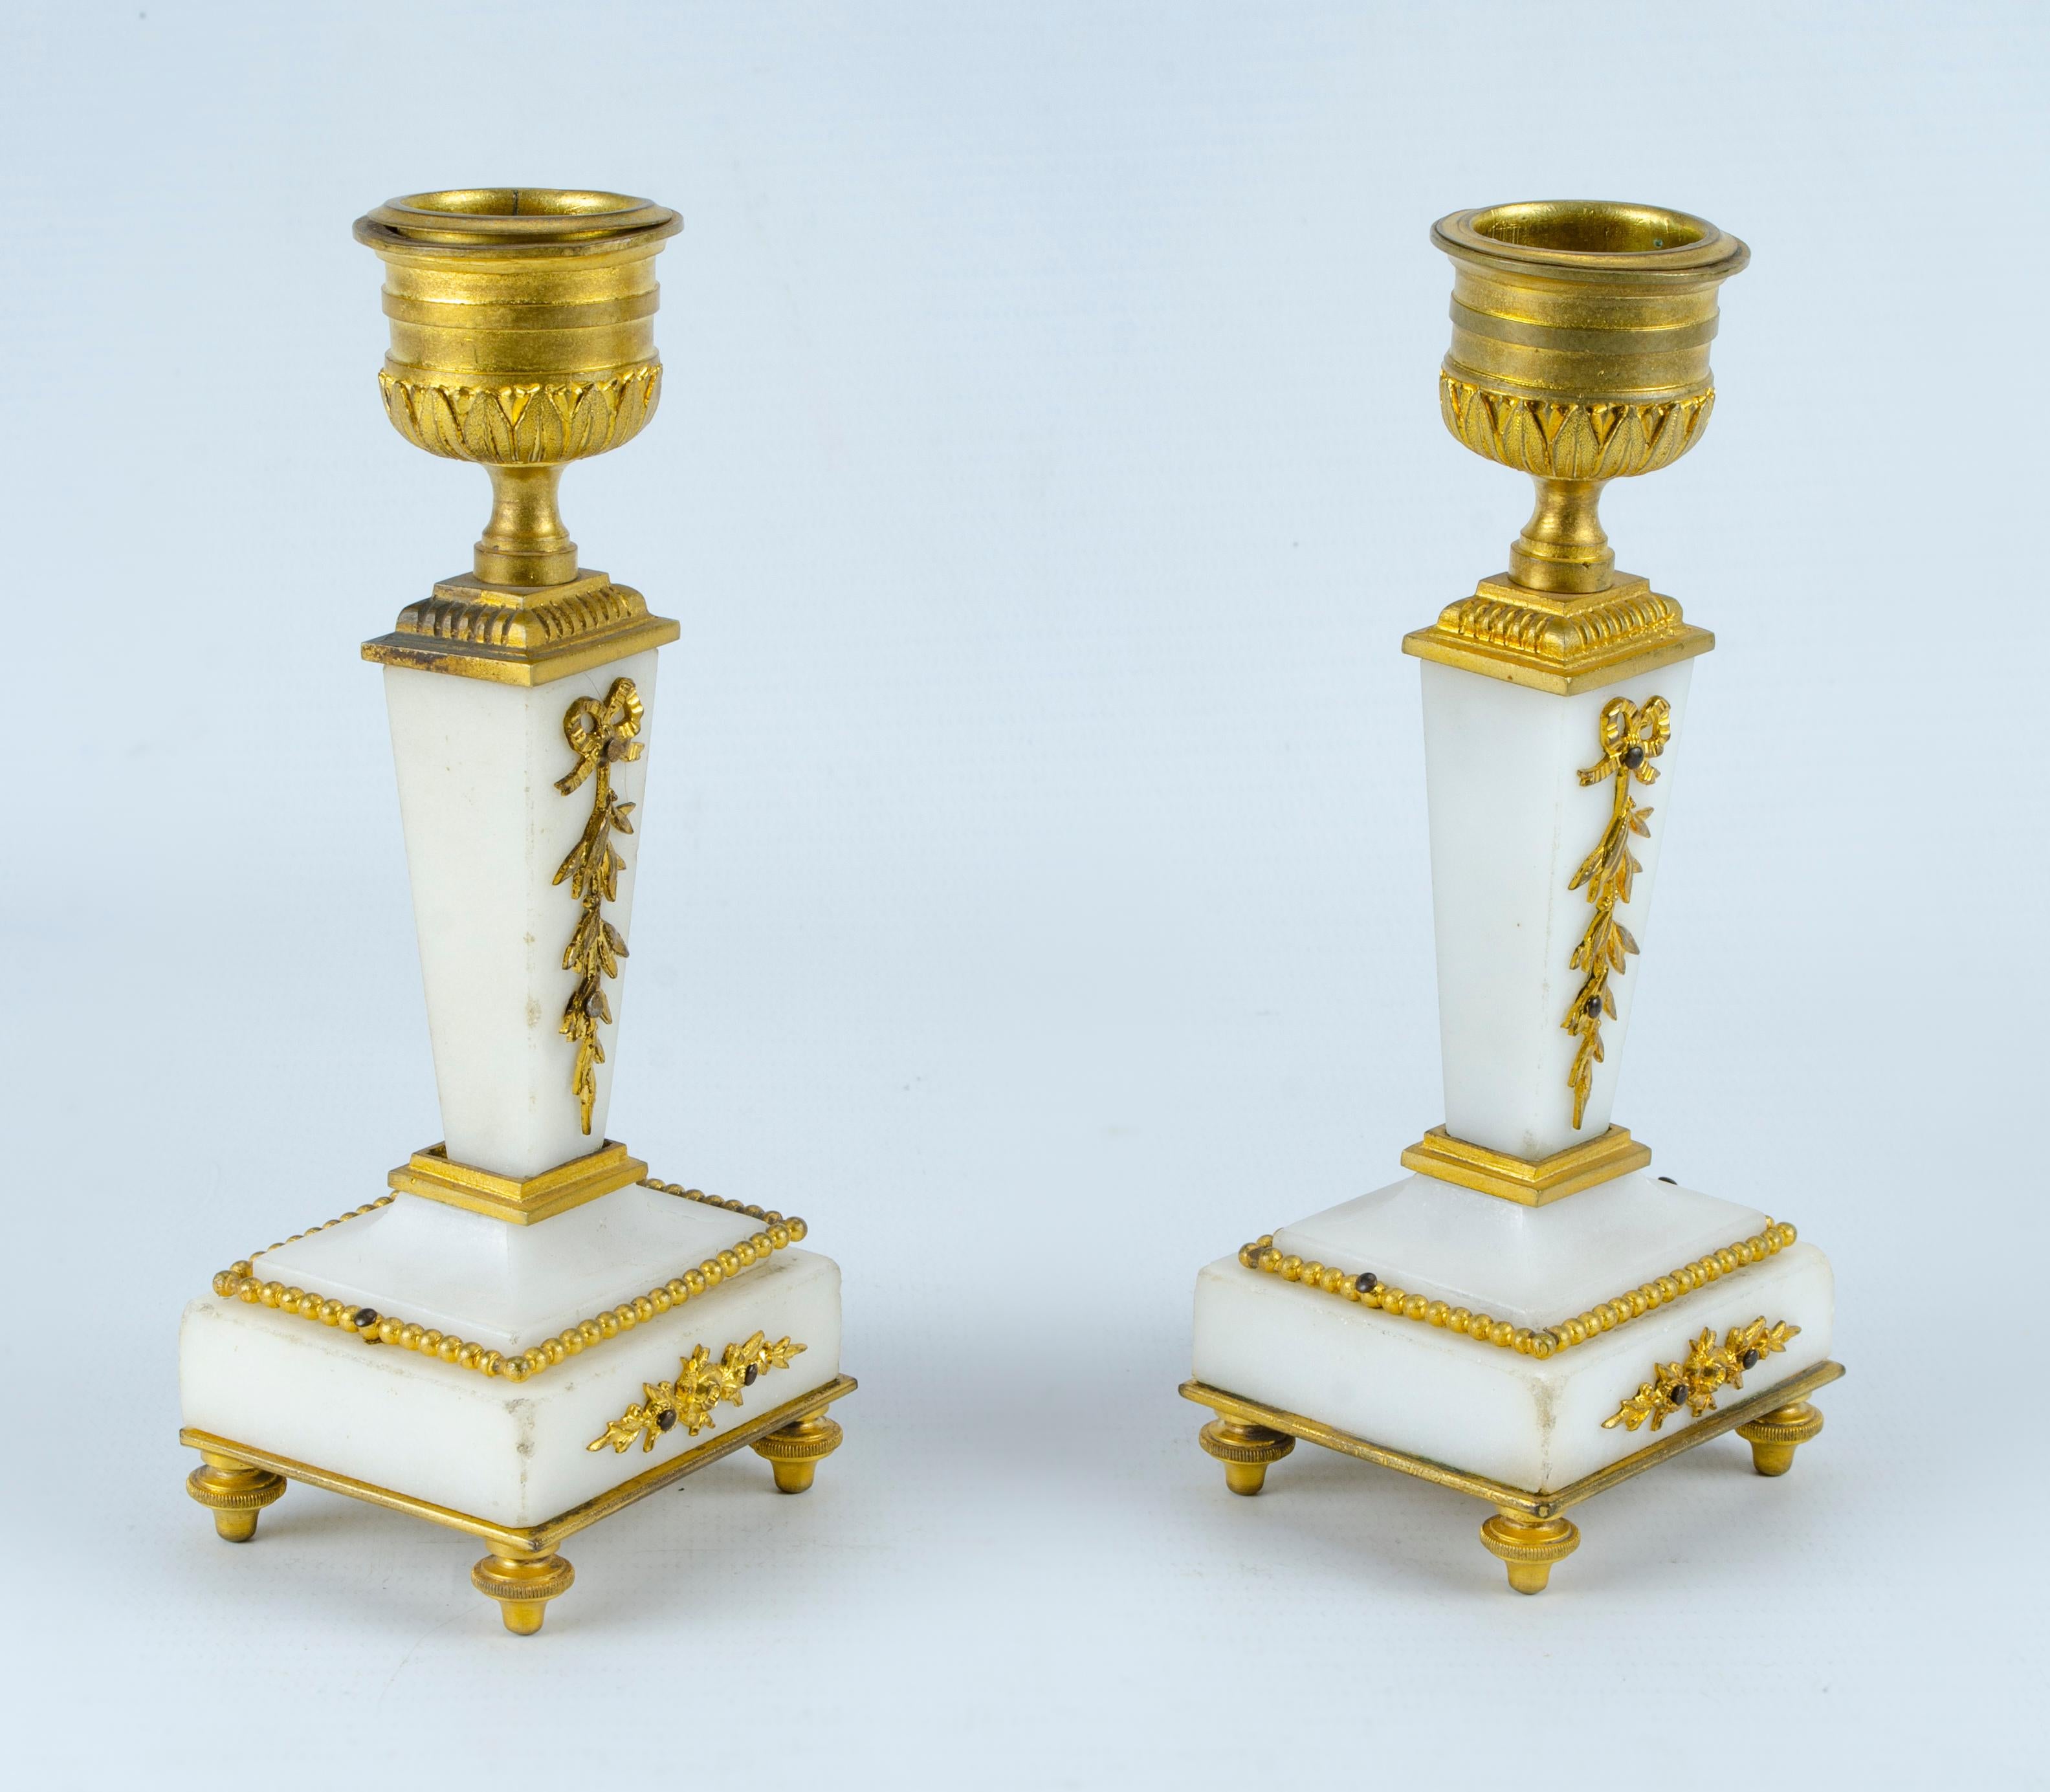 Couple of Candlesticks Style Empire
Empire style
Marble and golden bronze
Origin France circa 1900
Very good condition. Natural wear.